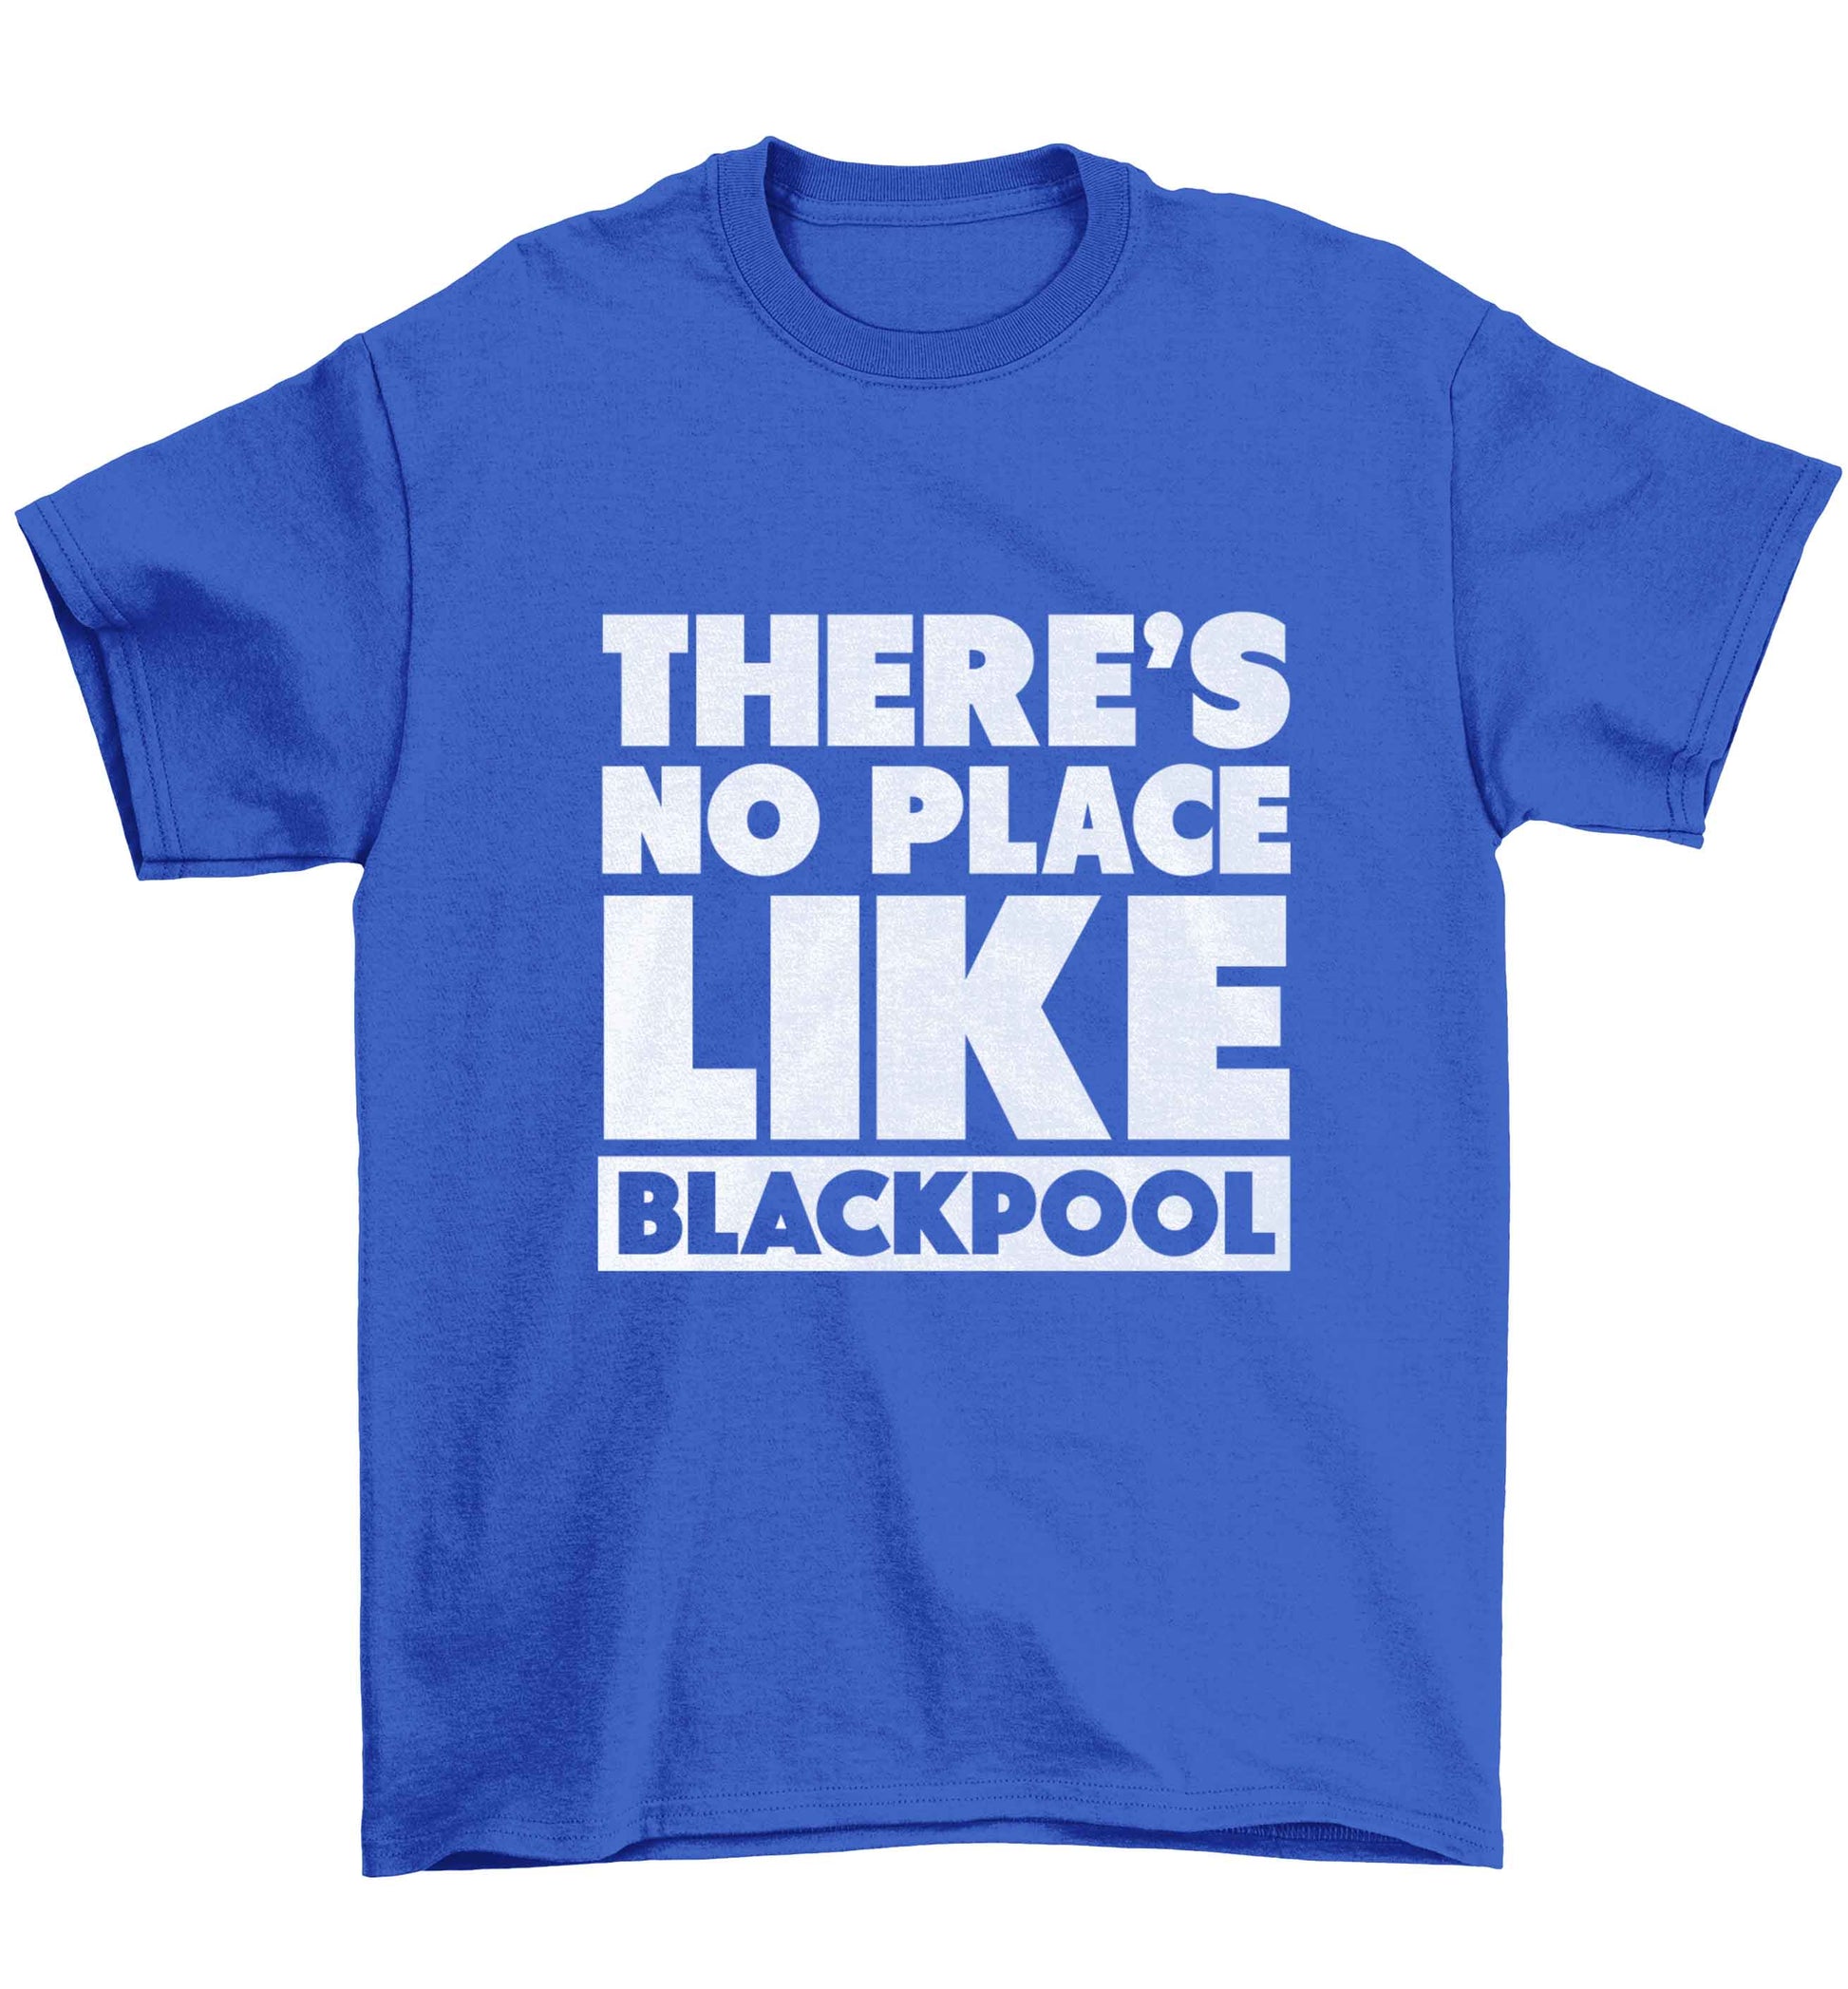 There's no place like Blackpool Children's blue Tshirt 12-13 Years